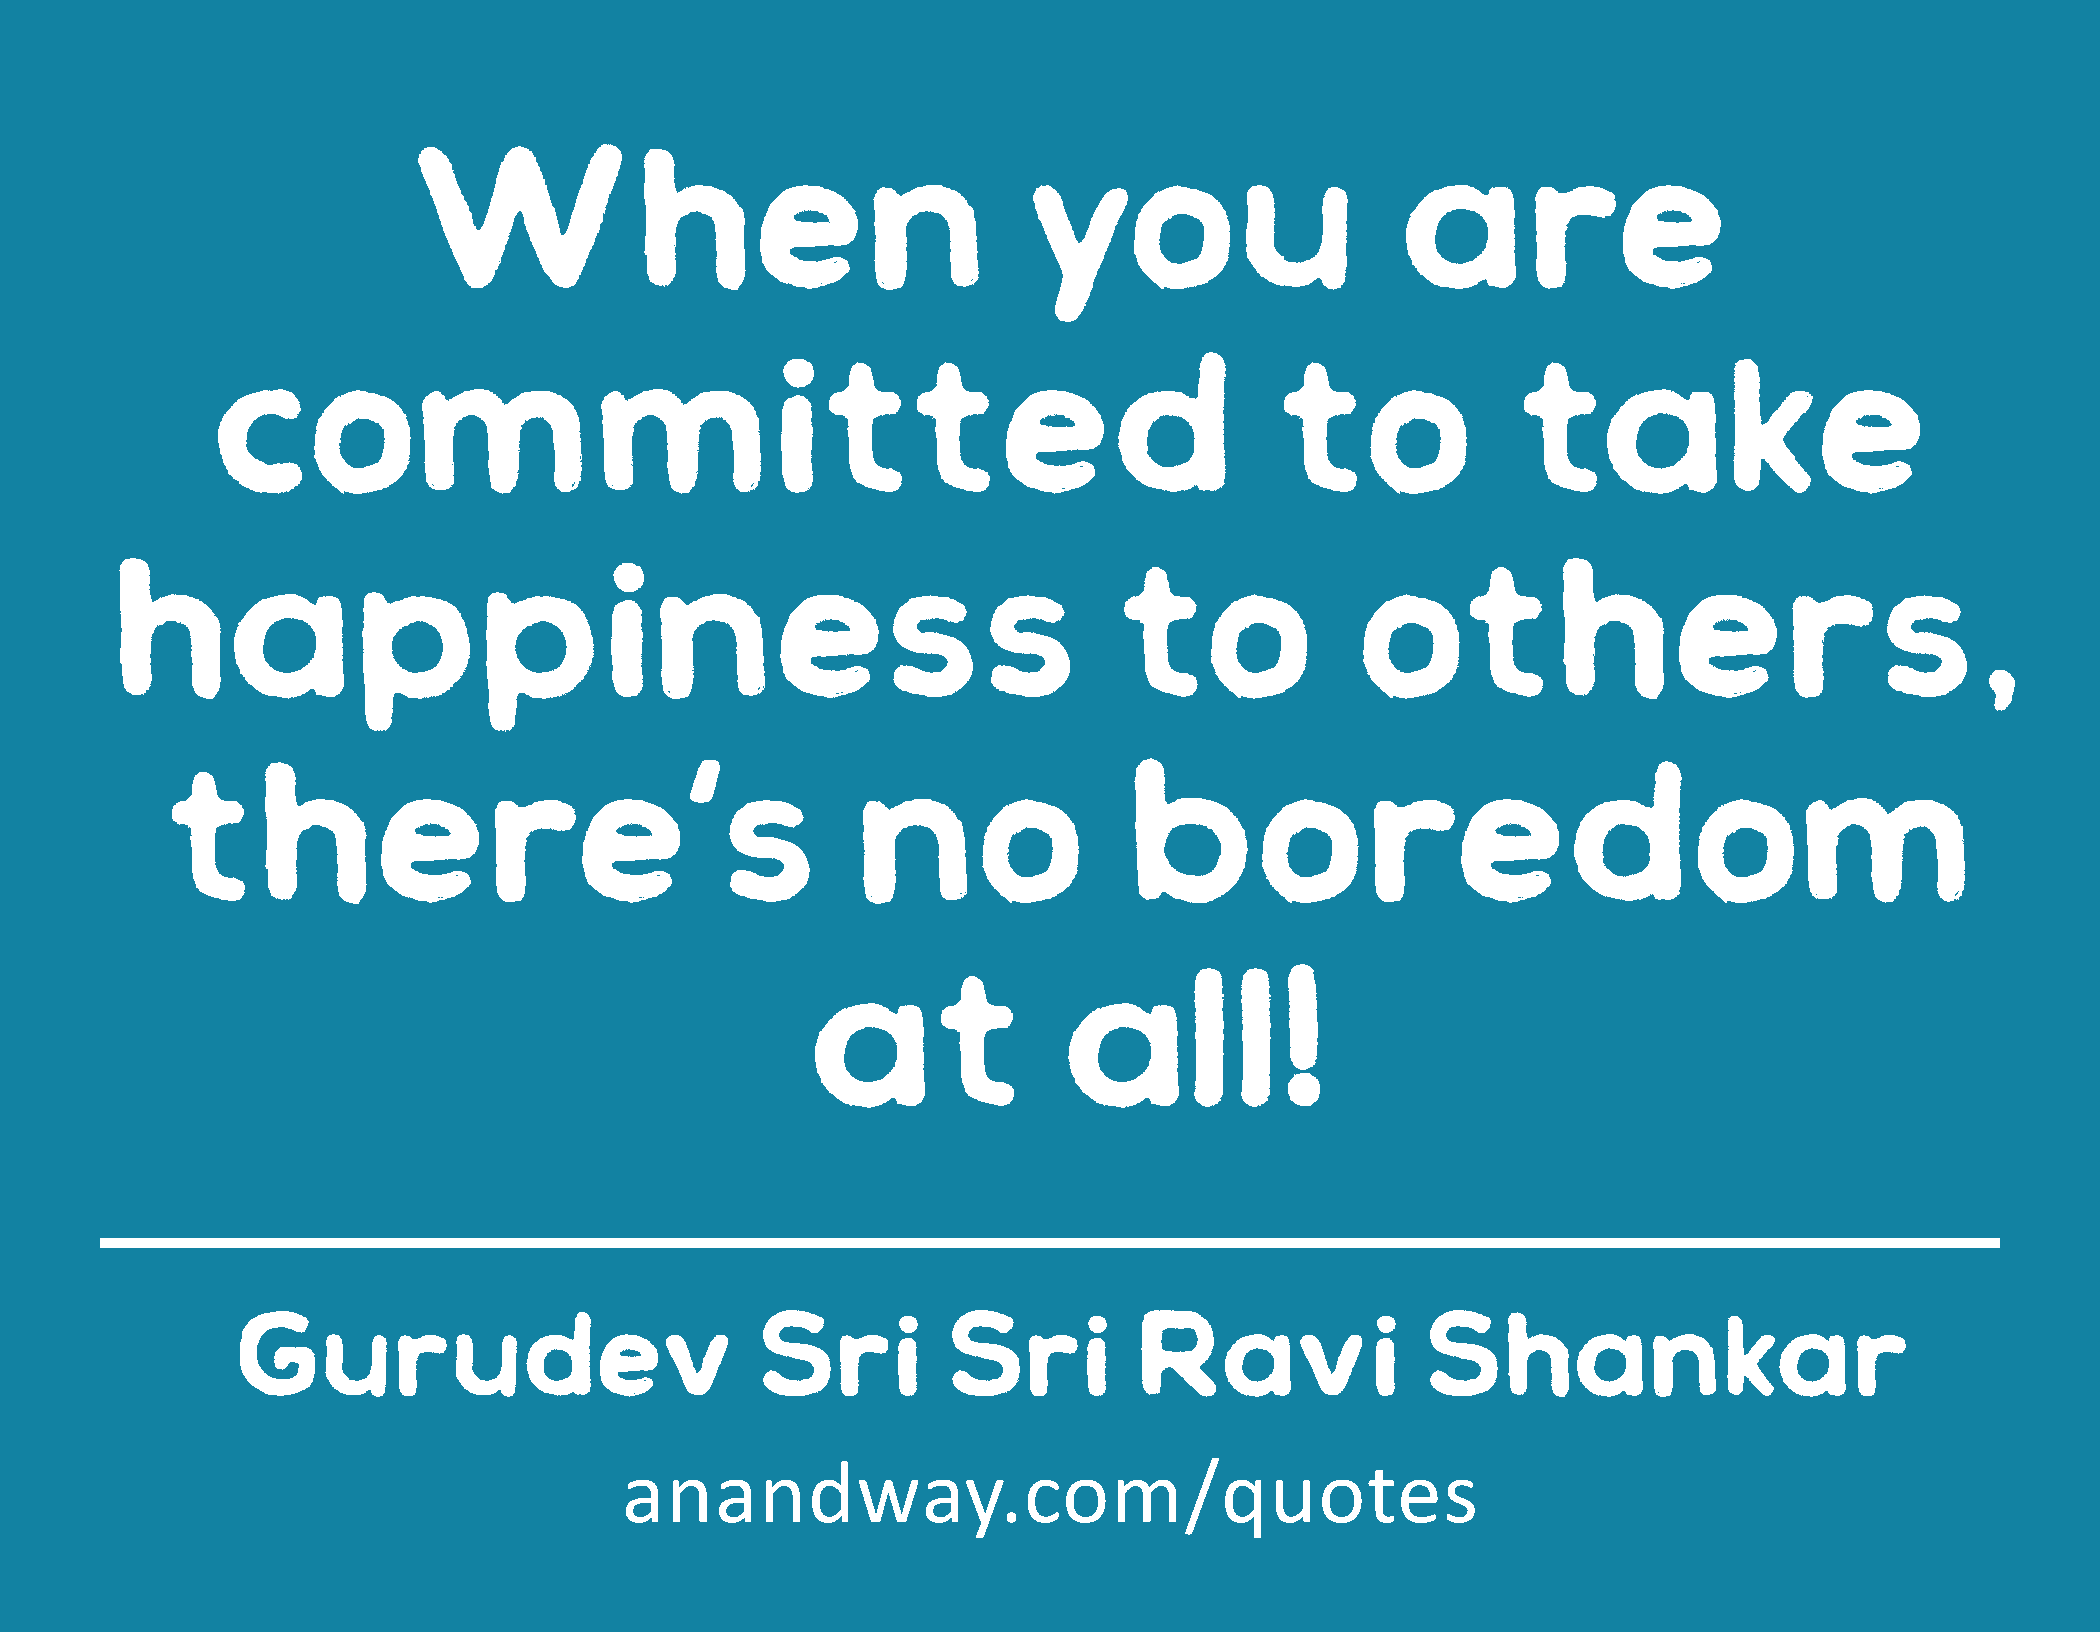 When you are committed to take happiness to others, there's no boredom at all! 
 -Gurudev Sri Sri Ravi Shankar